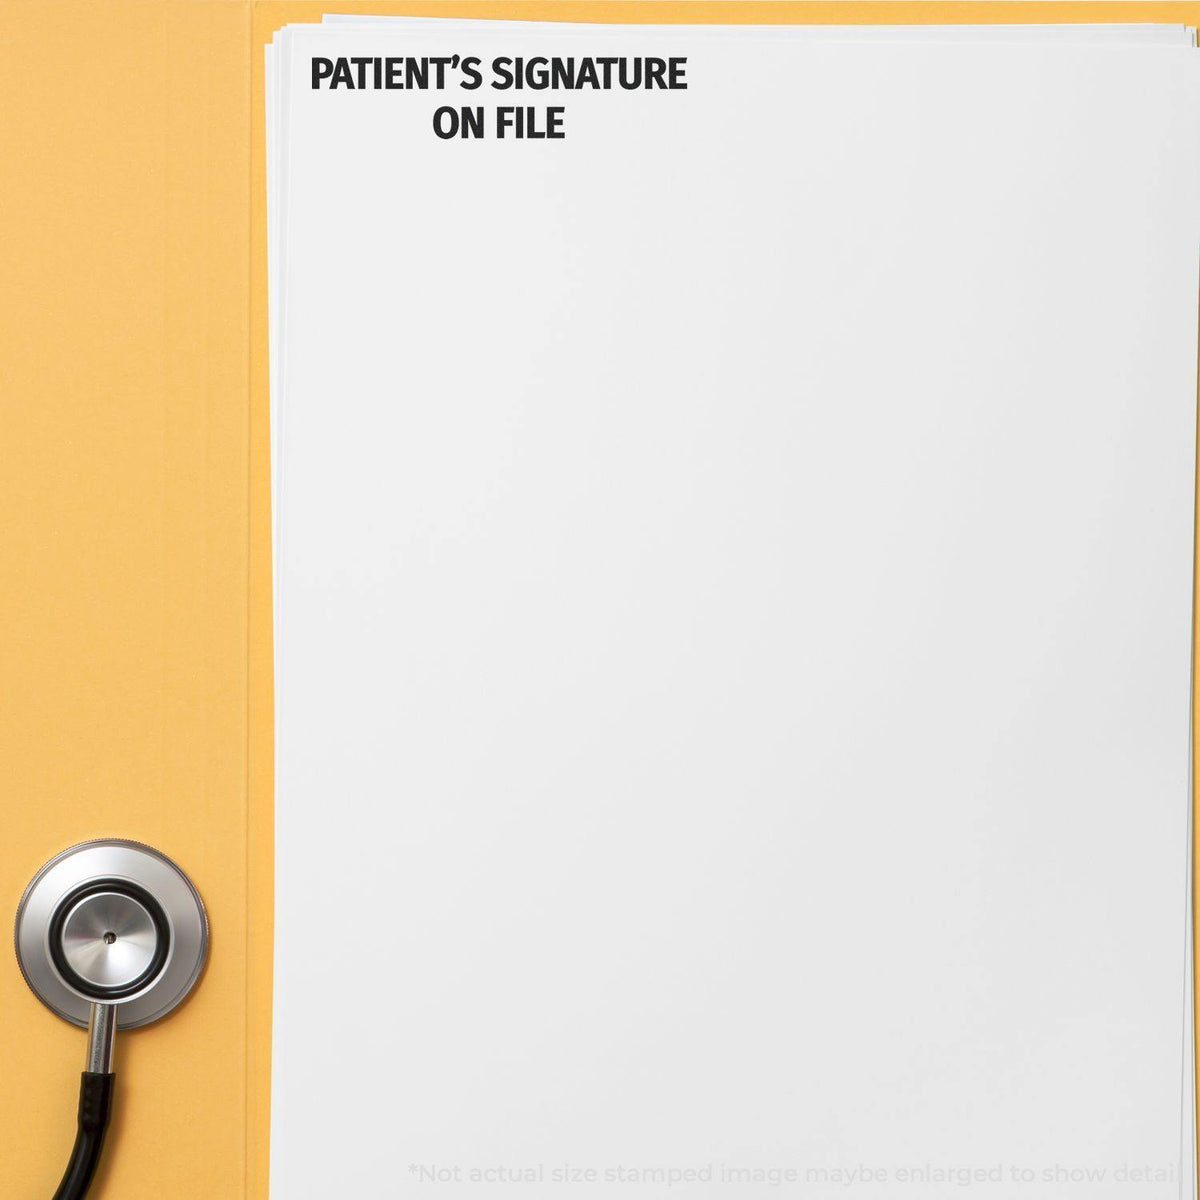 In Use Slim Pre-Inked Patients Signature on File Stamp Image